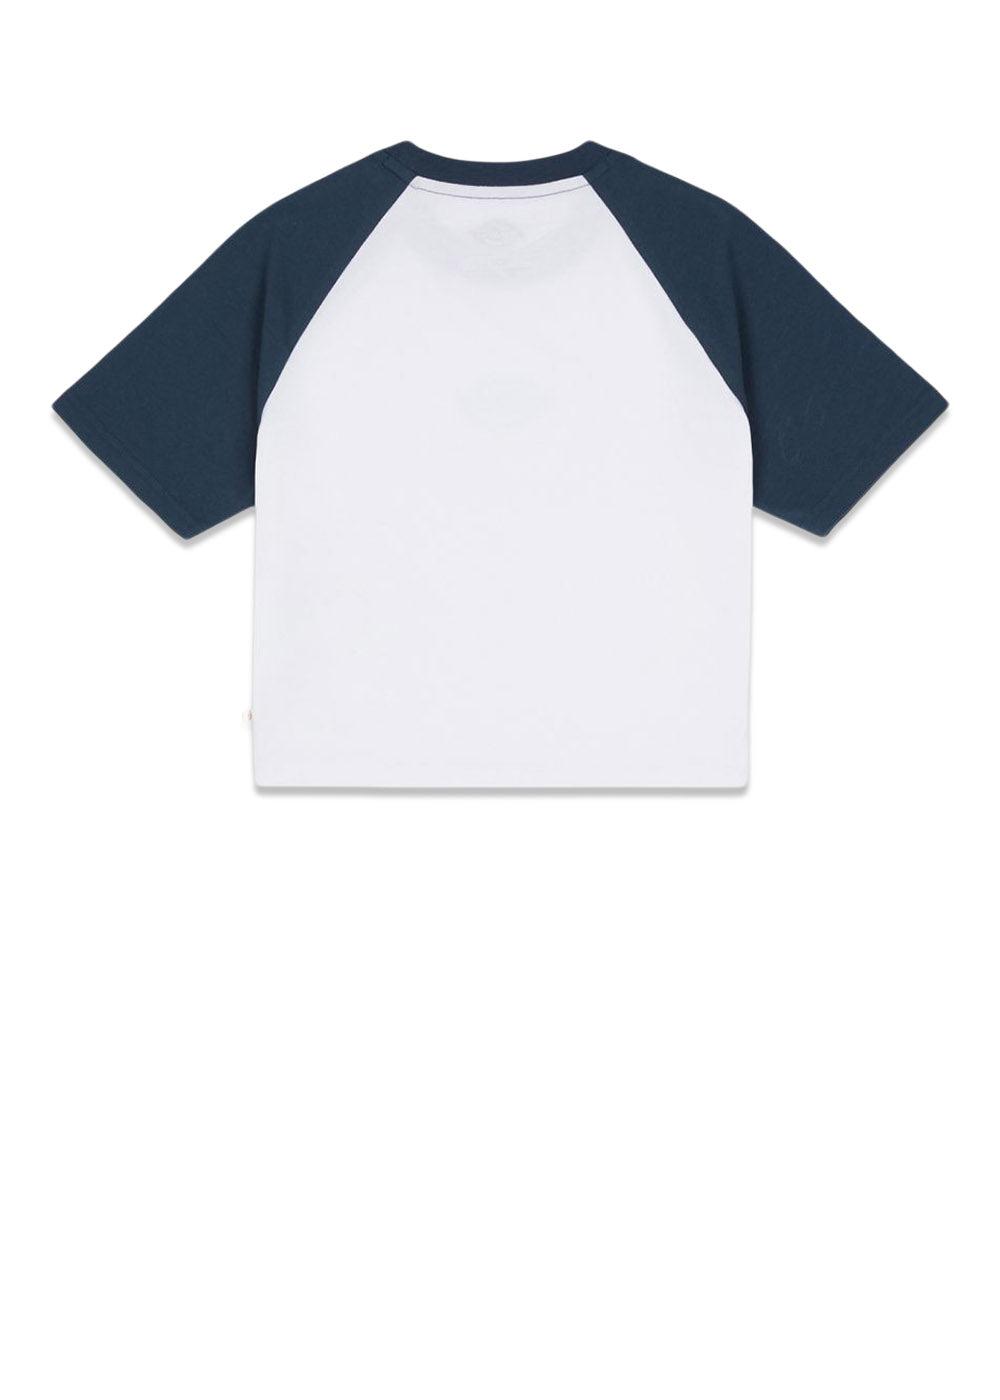 Sodaville Tee W - Air Force Blue